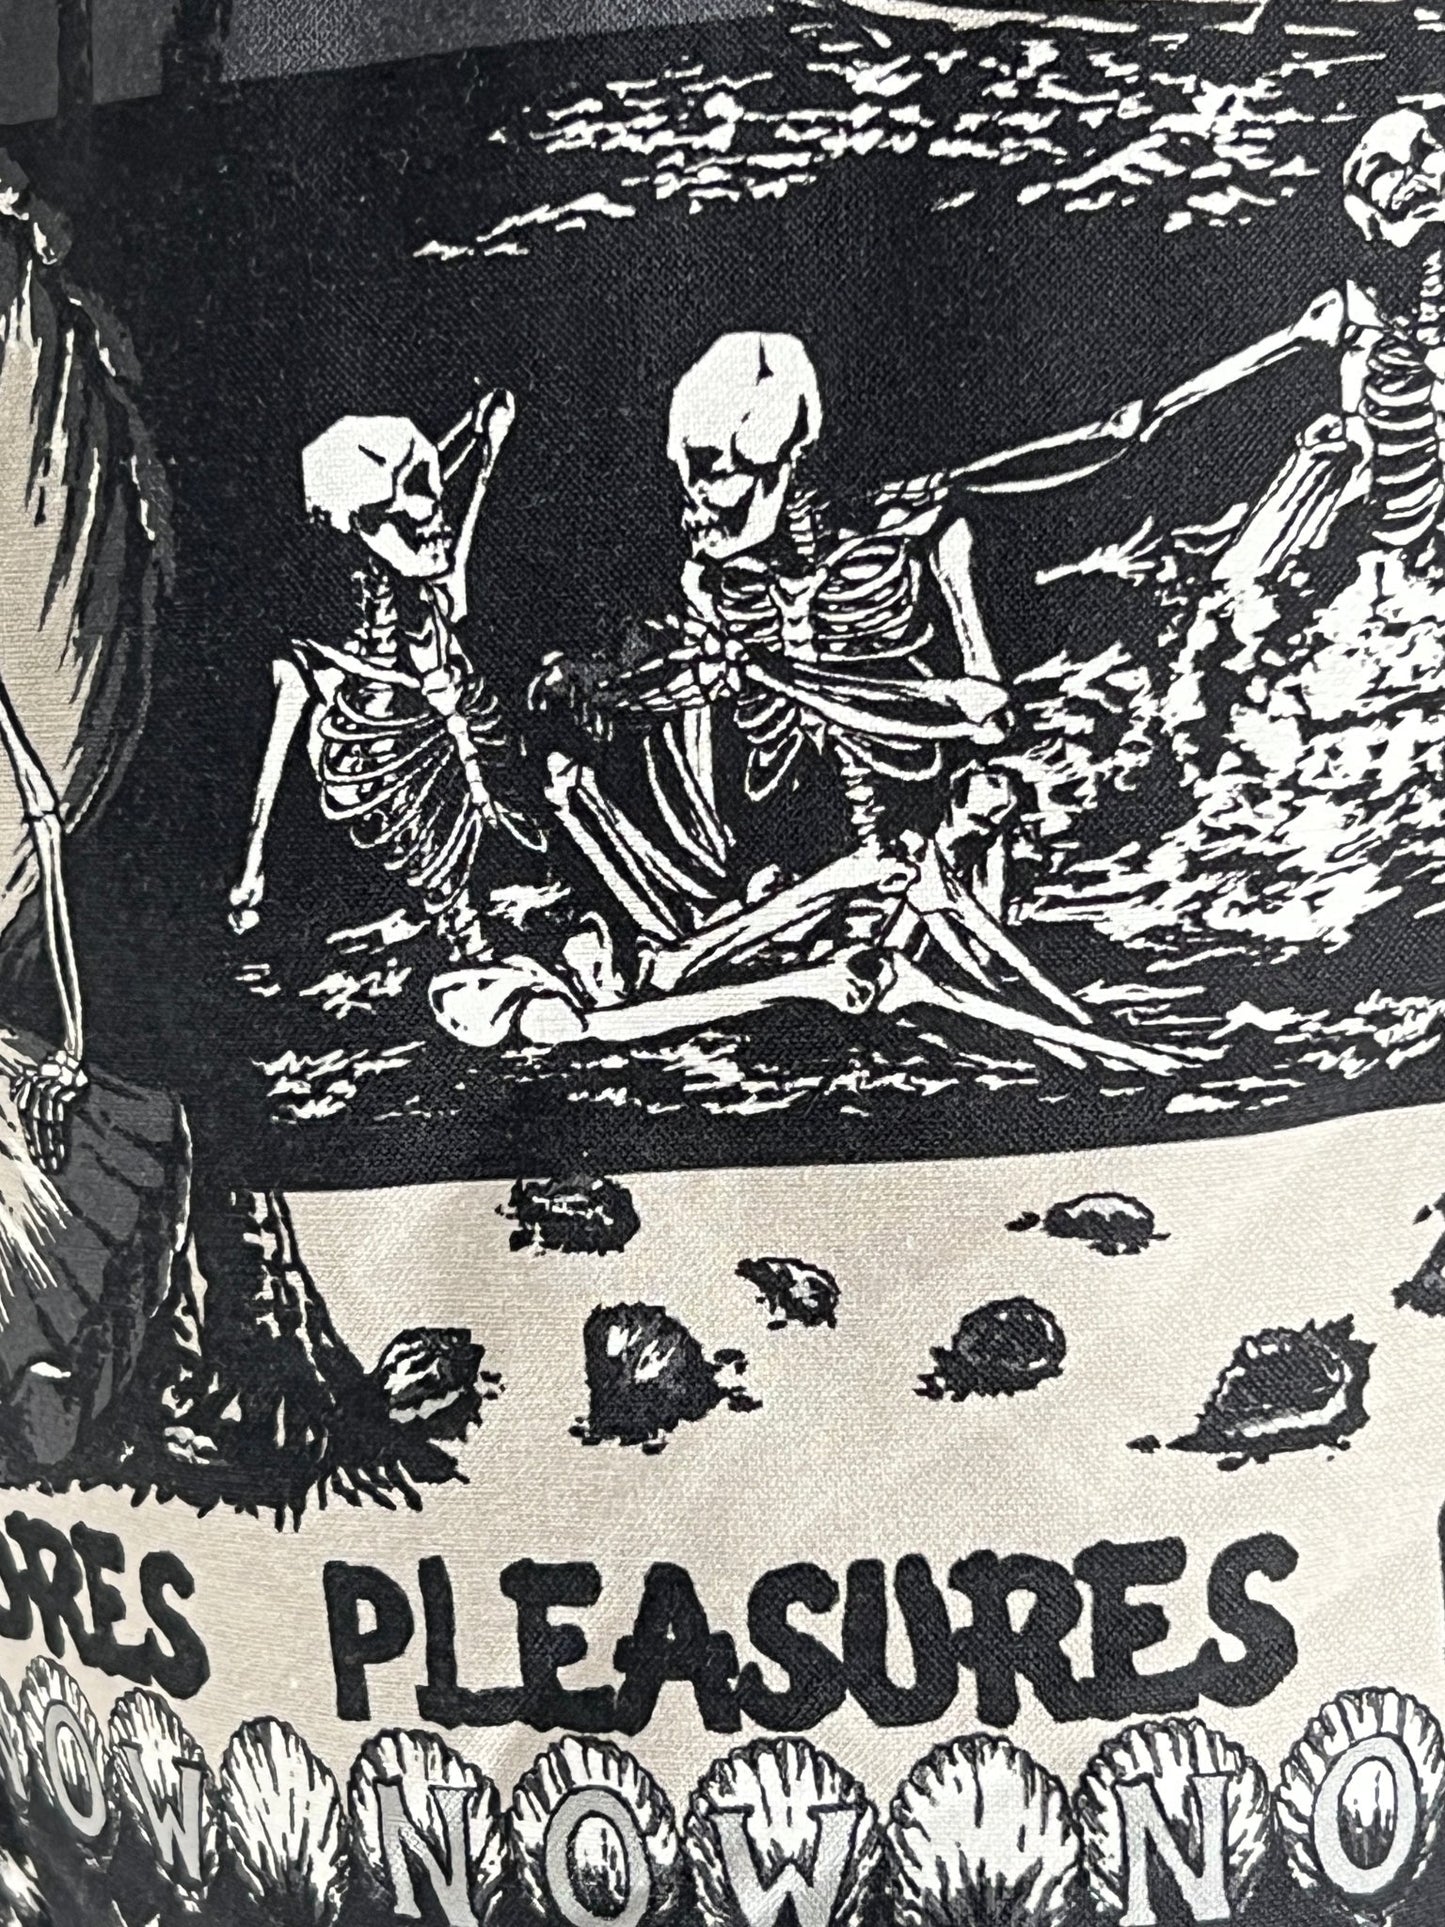 A black and white poster with skeletons wearing PLEASURES BEACH SHORT BLACK on it.